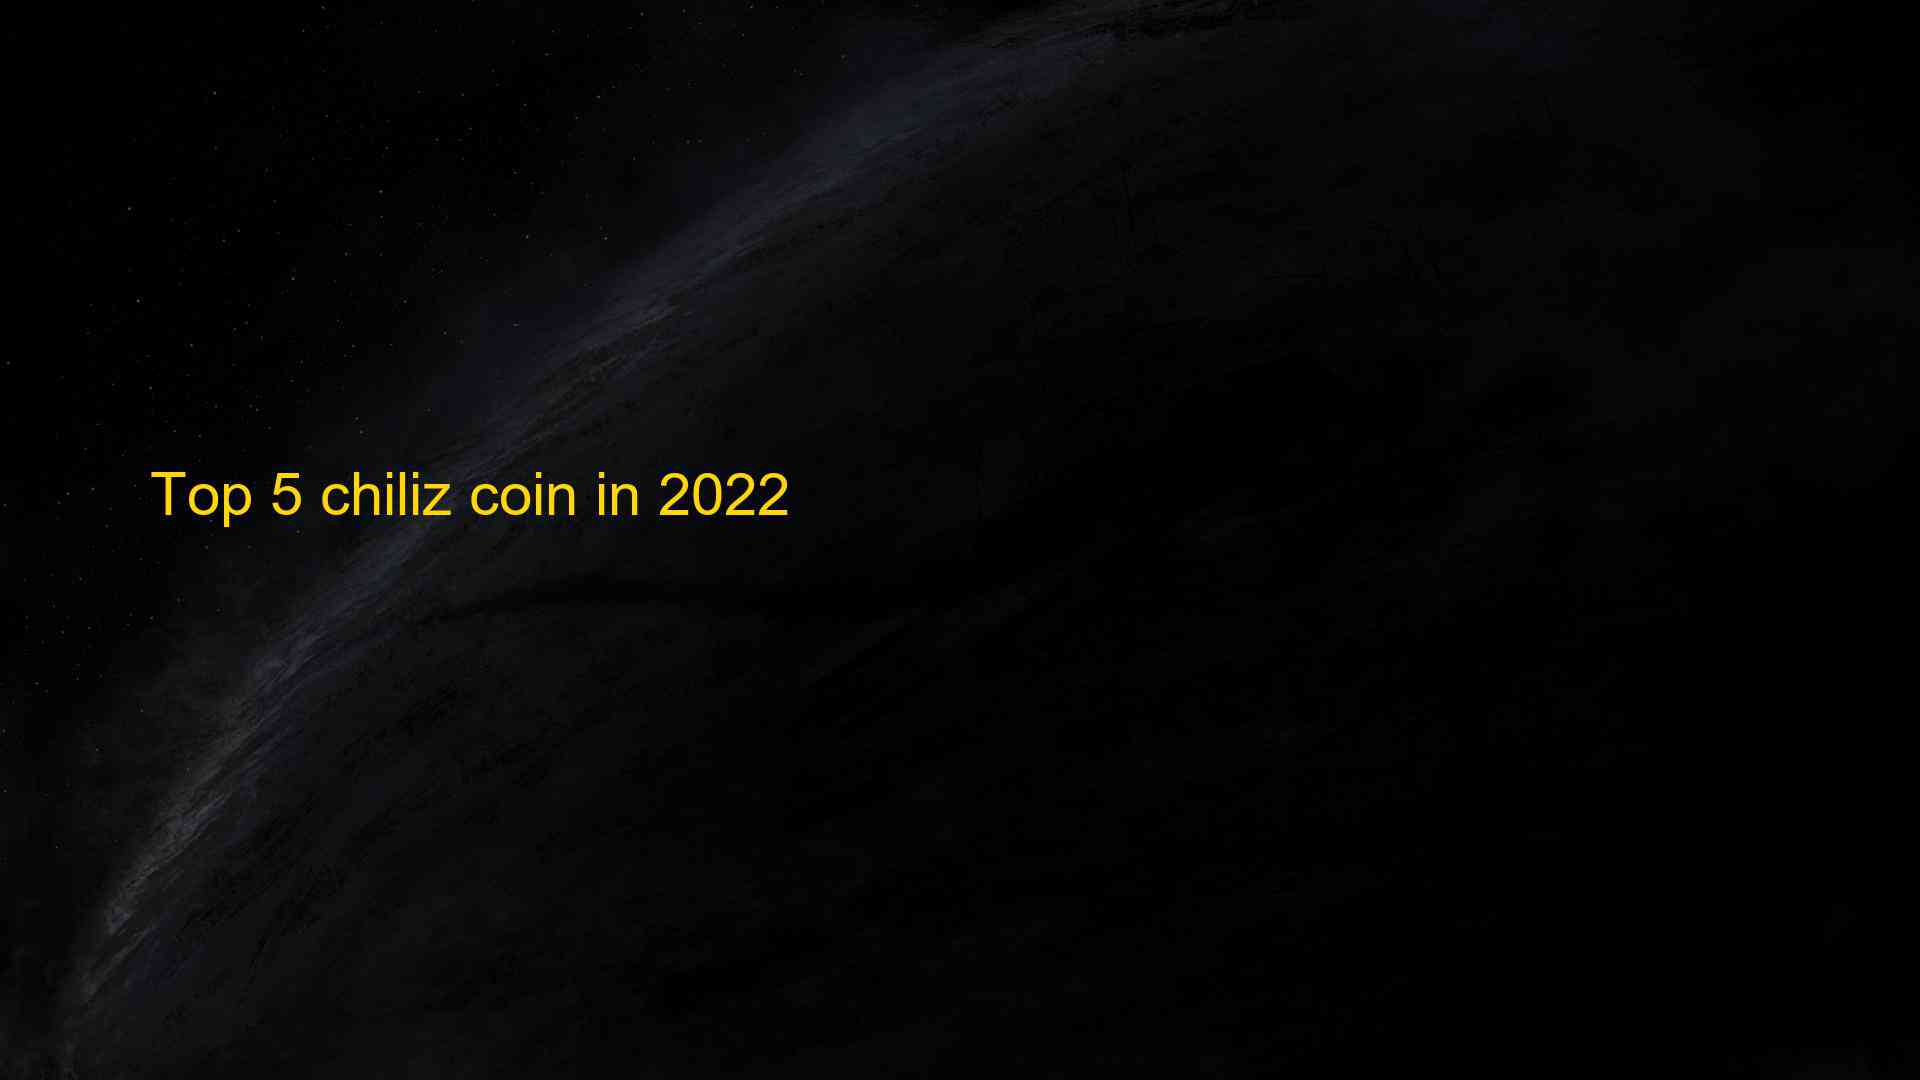 Top 5 chiliz coin in 2022 1659942354